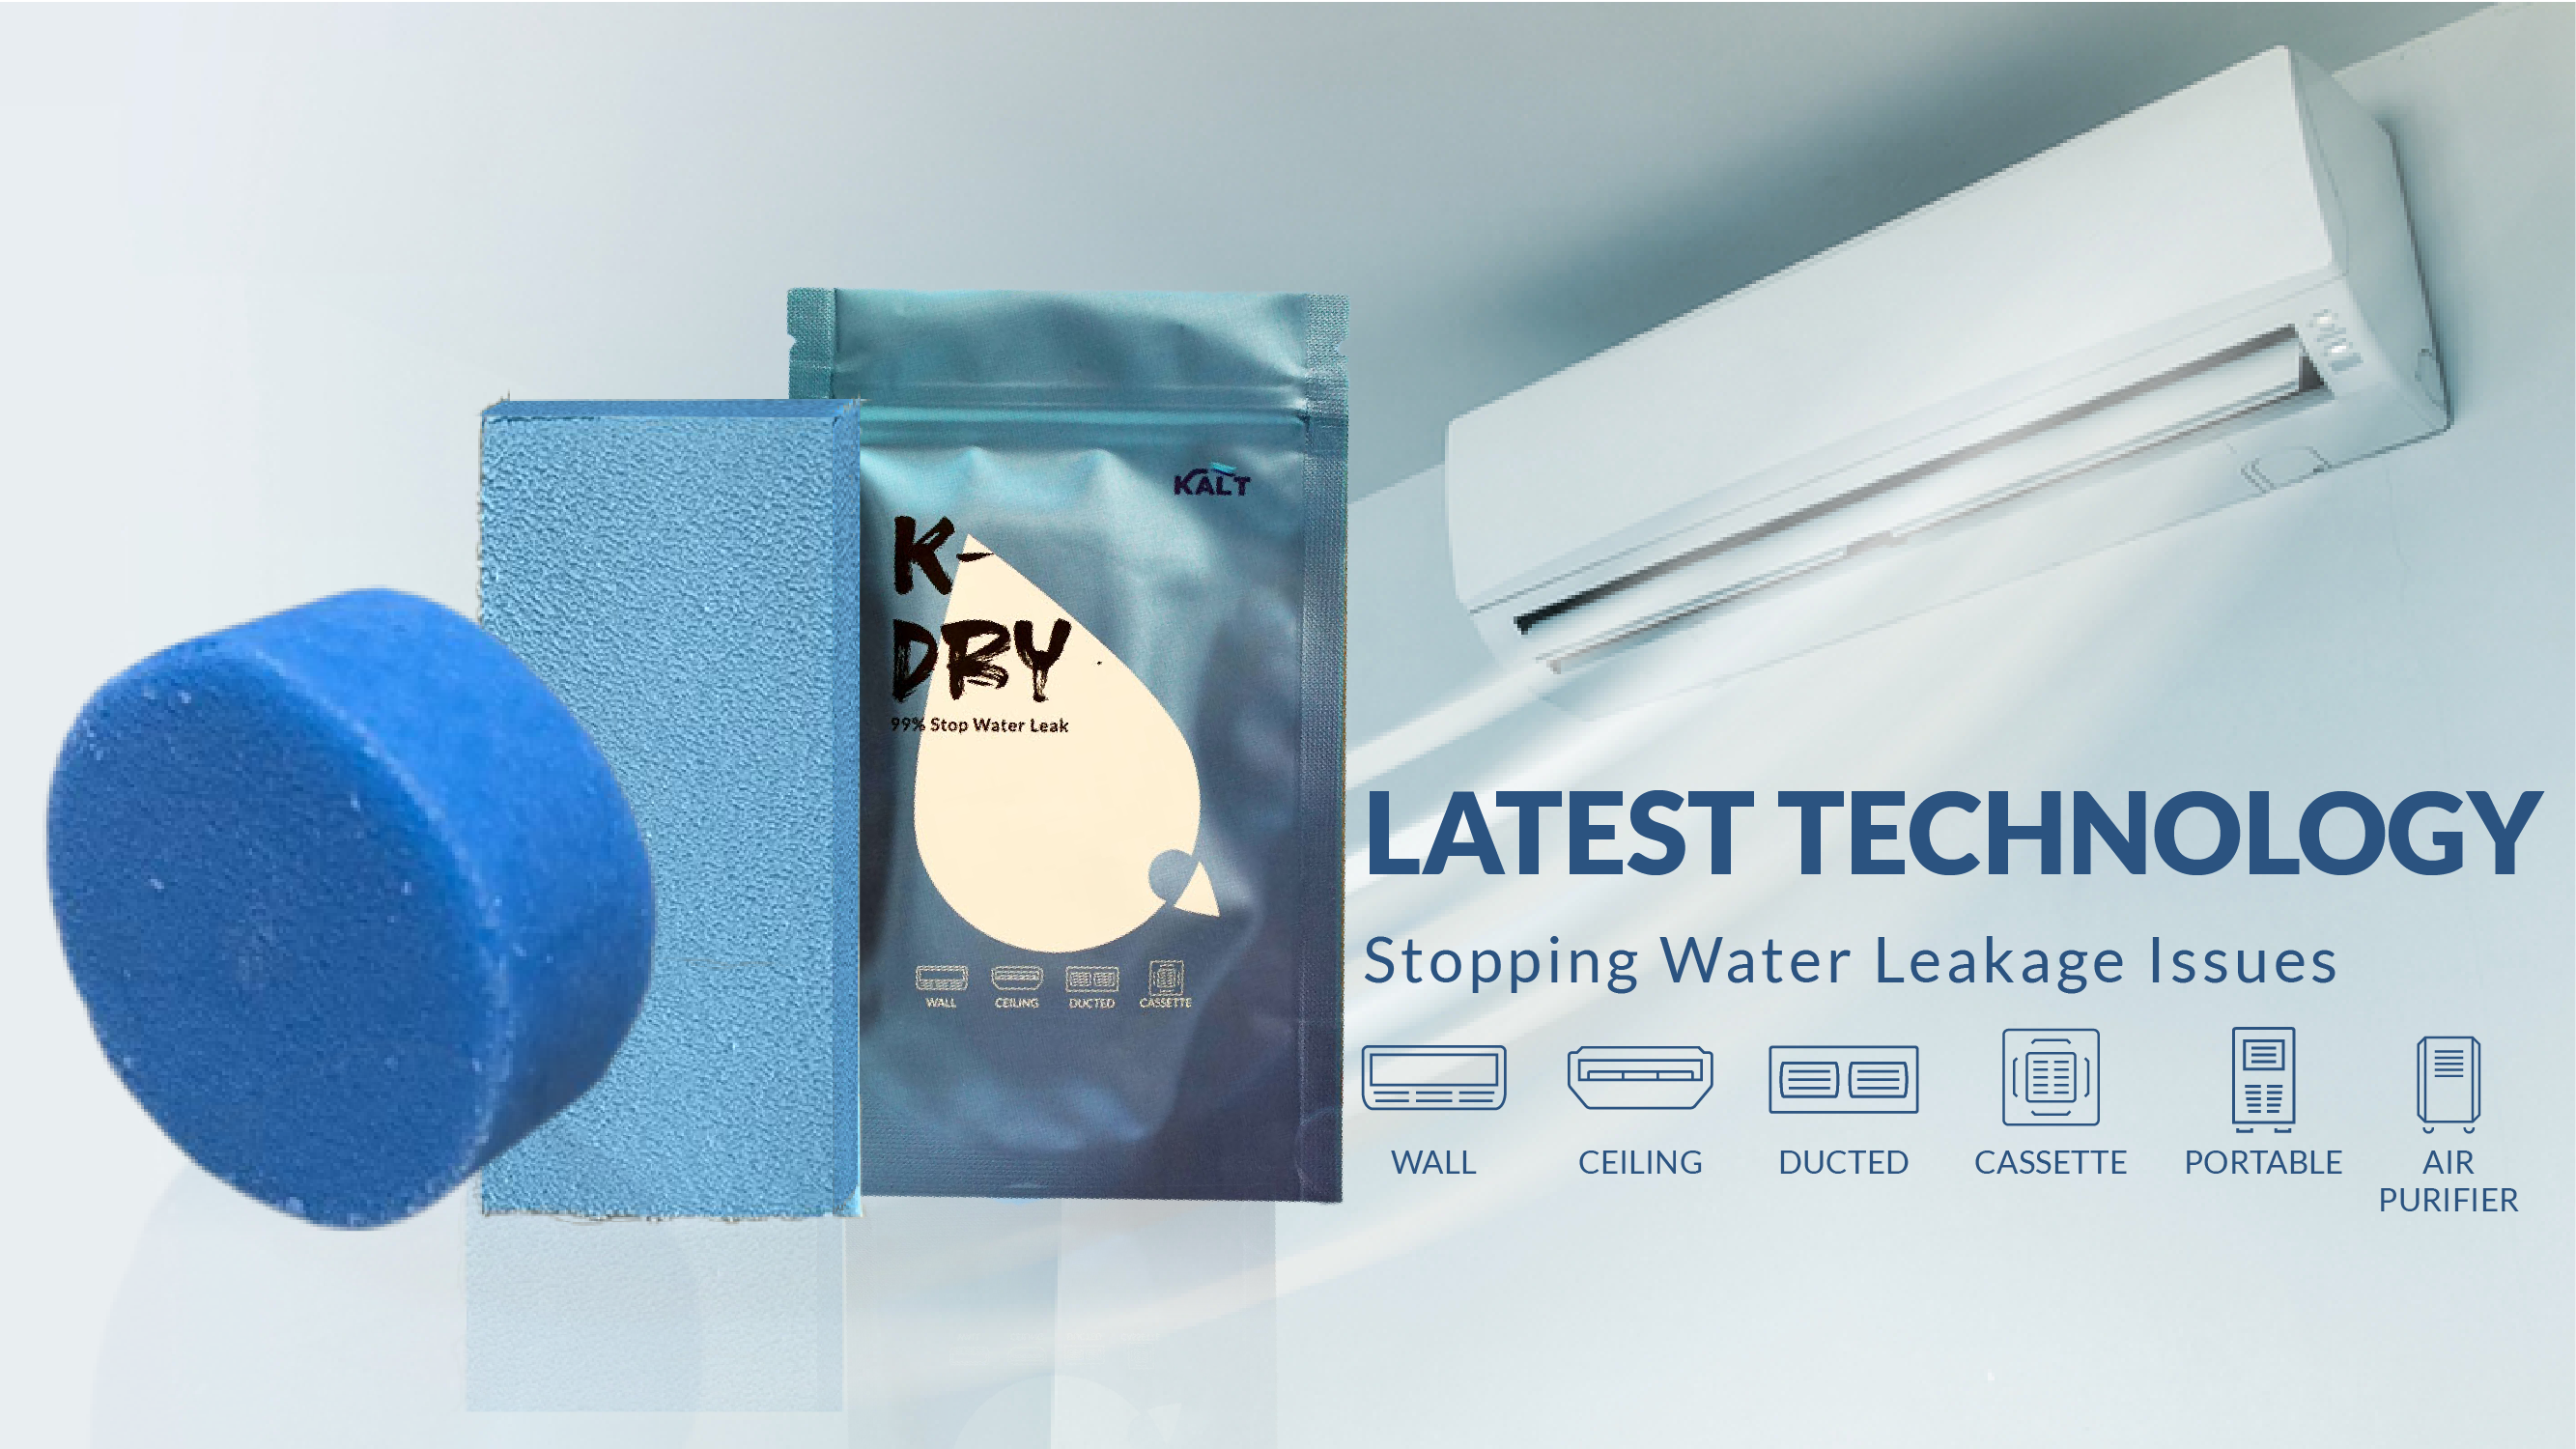 Kalt K-dry is the latest technology that handles the problem of air conditioner leakage. With its amazing advantages, you will find that it is easy to promote and sell, providing you with the opportunity to earn income immediately.  High Commission, Flexible Work, Shared Commission